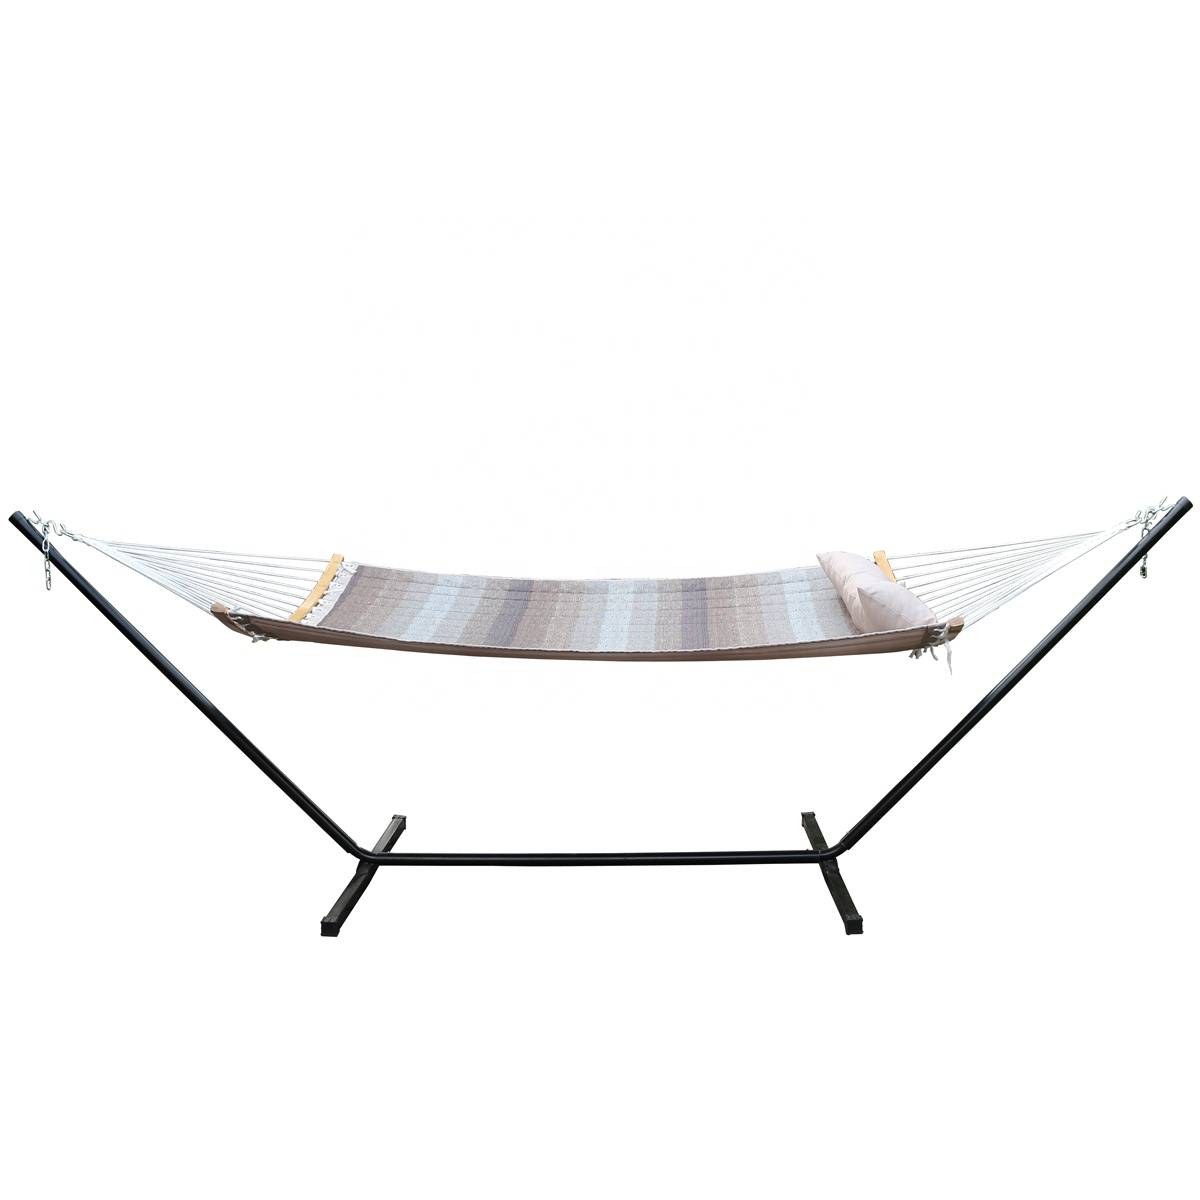 Wholesale Price Foldable Hanging Chair - Folding Curved  Bar Portable Hammock with Pillow and Carry Bag Hammock Swing Camping Hammocks – Top Asian